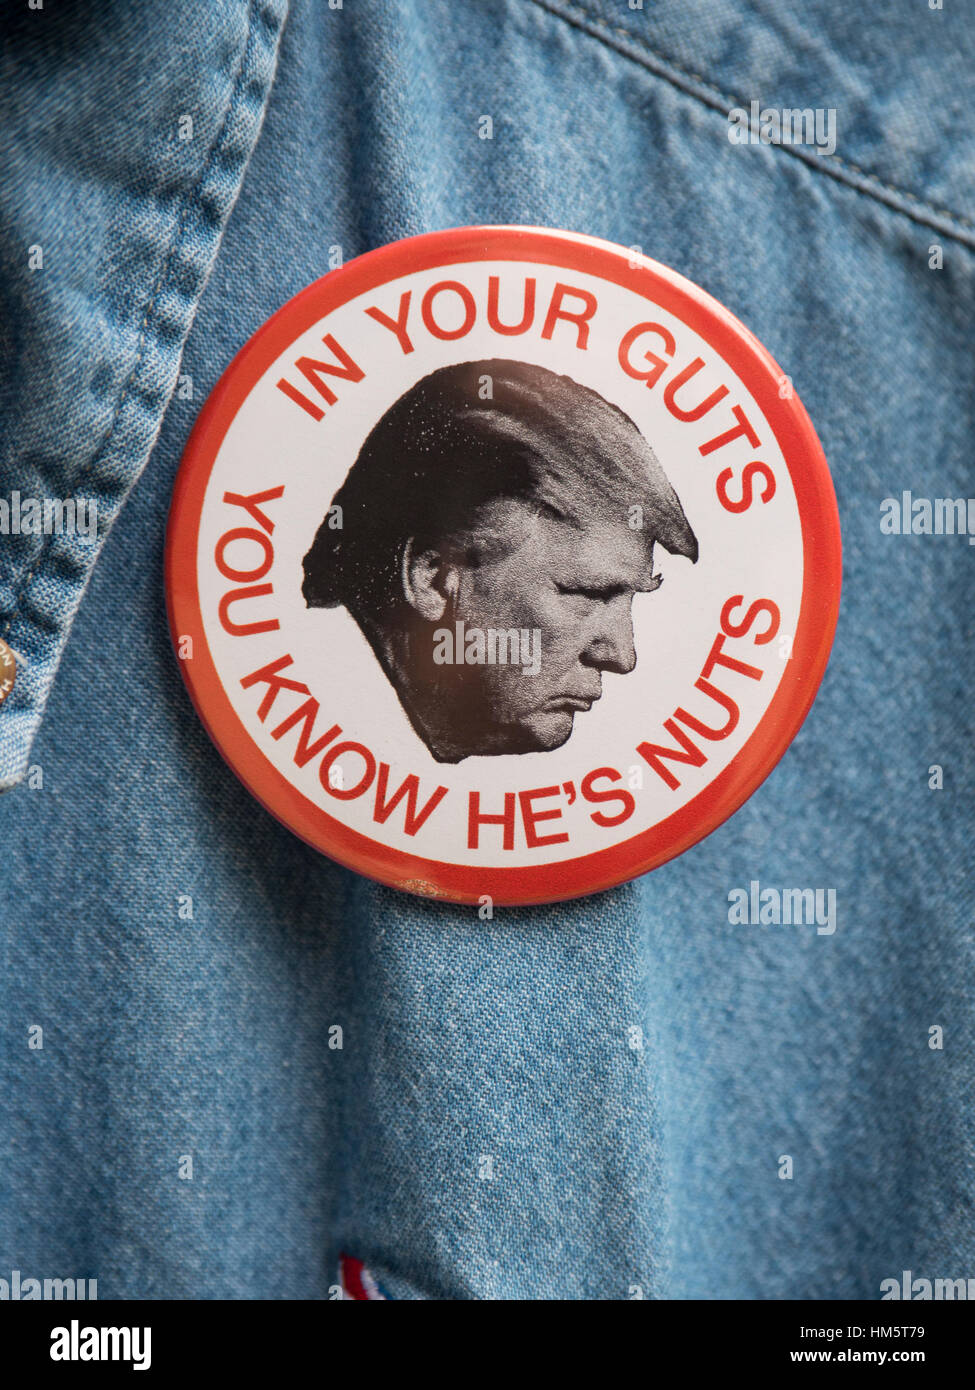 In Your Guts You Know He's Nuts Donald Trump protest button worn by a man demonstrating against the Trump administration Stock Photo